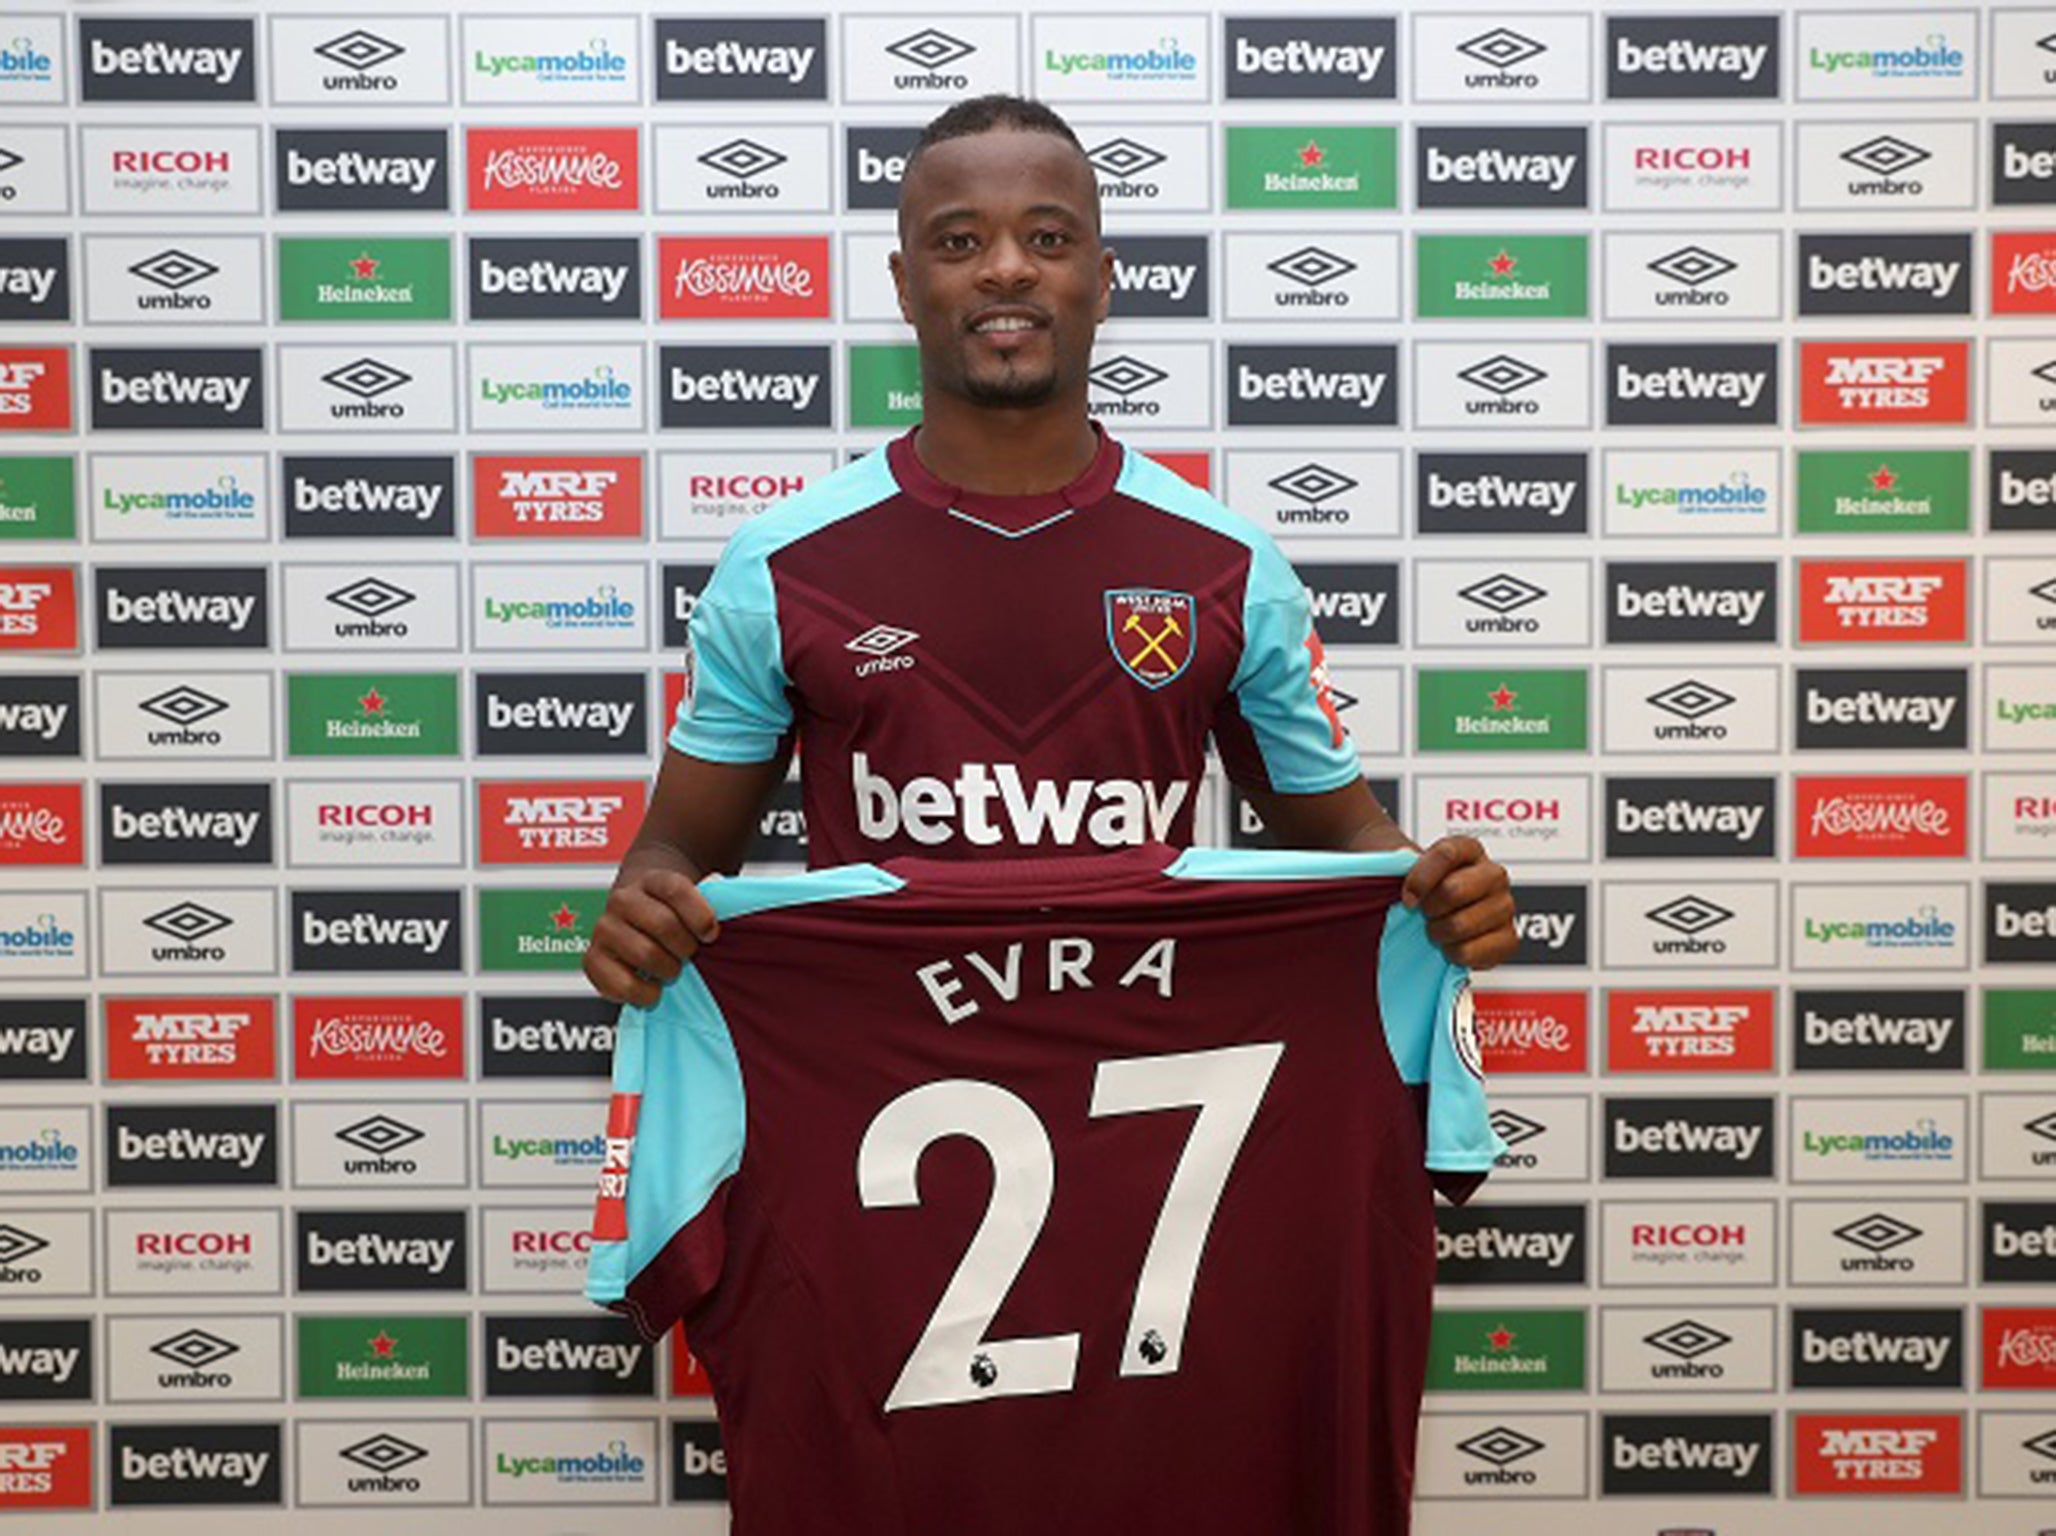 The full-back has signed a short term deal with West Ham